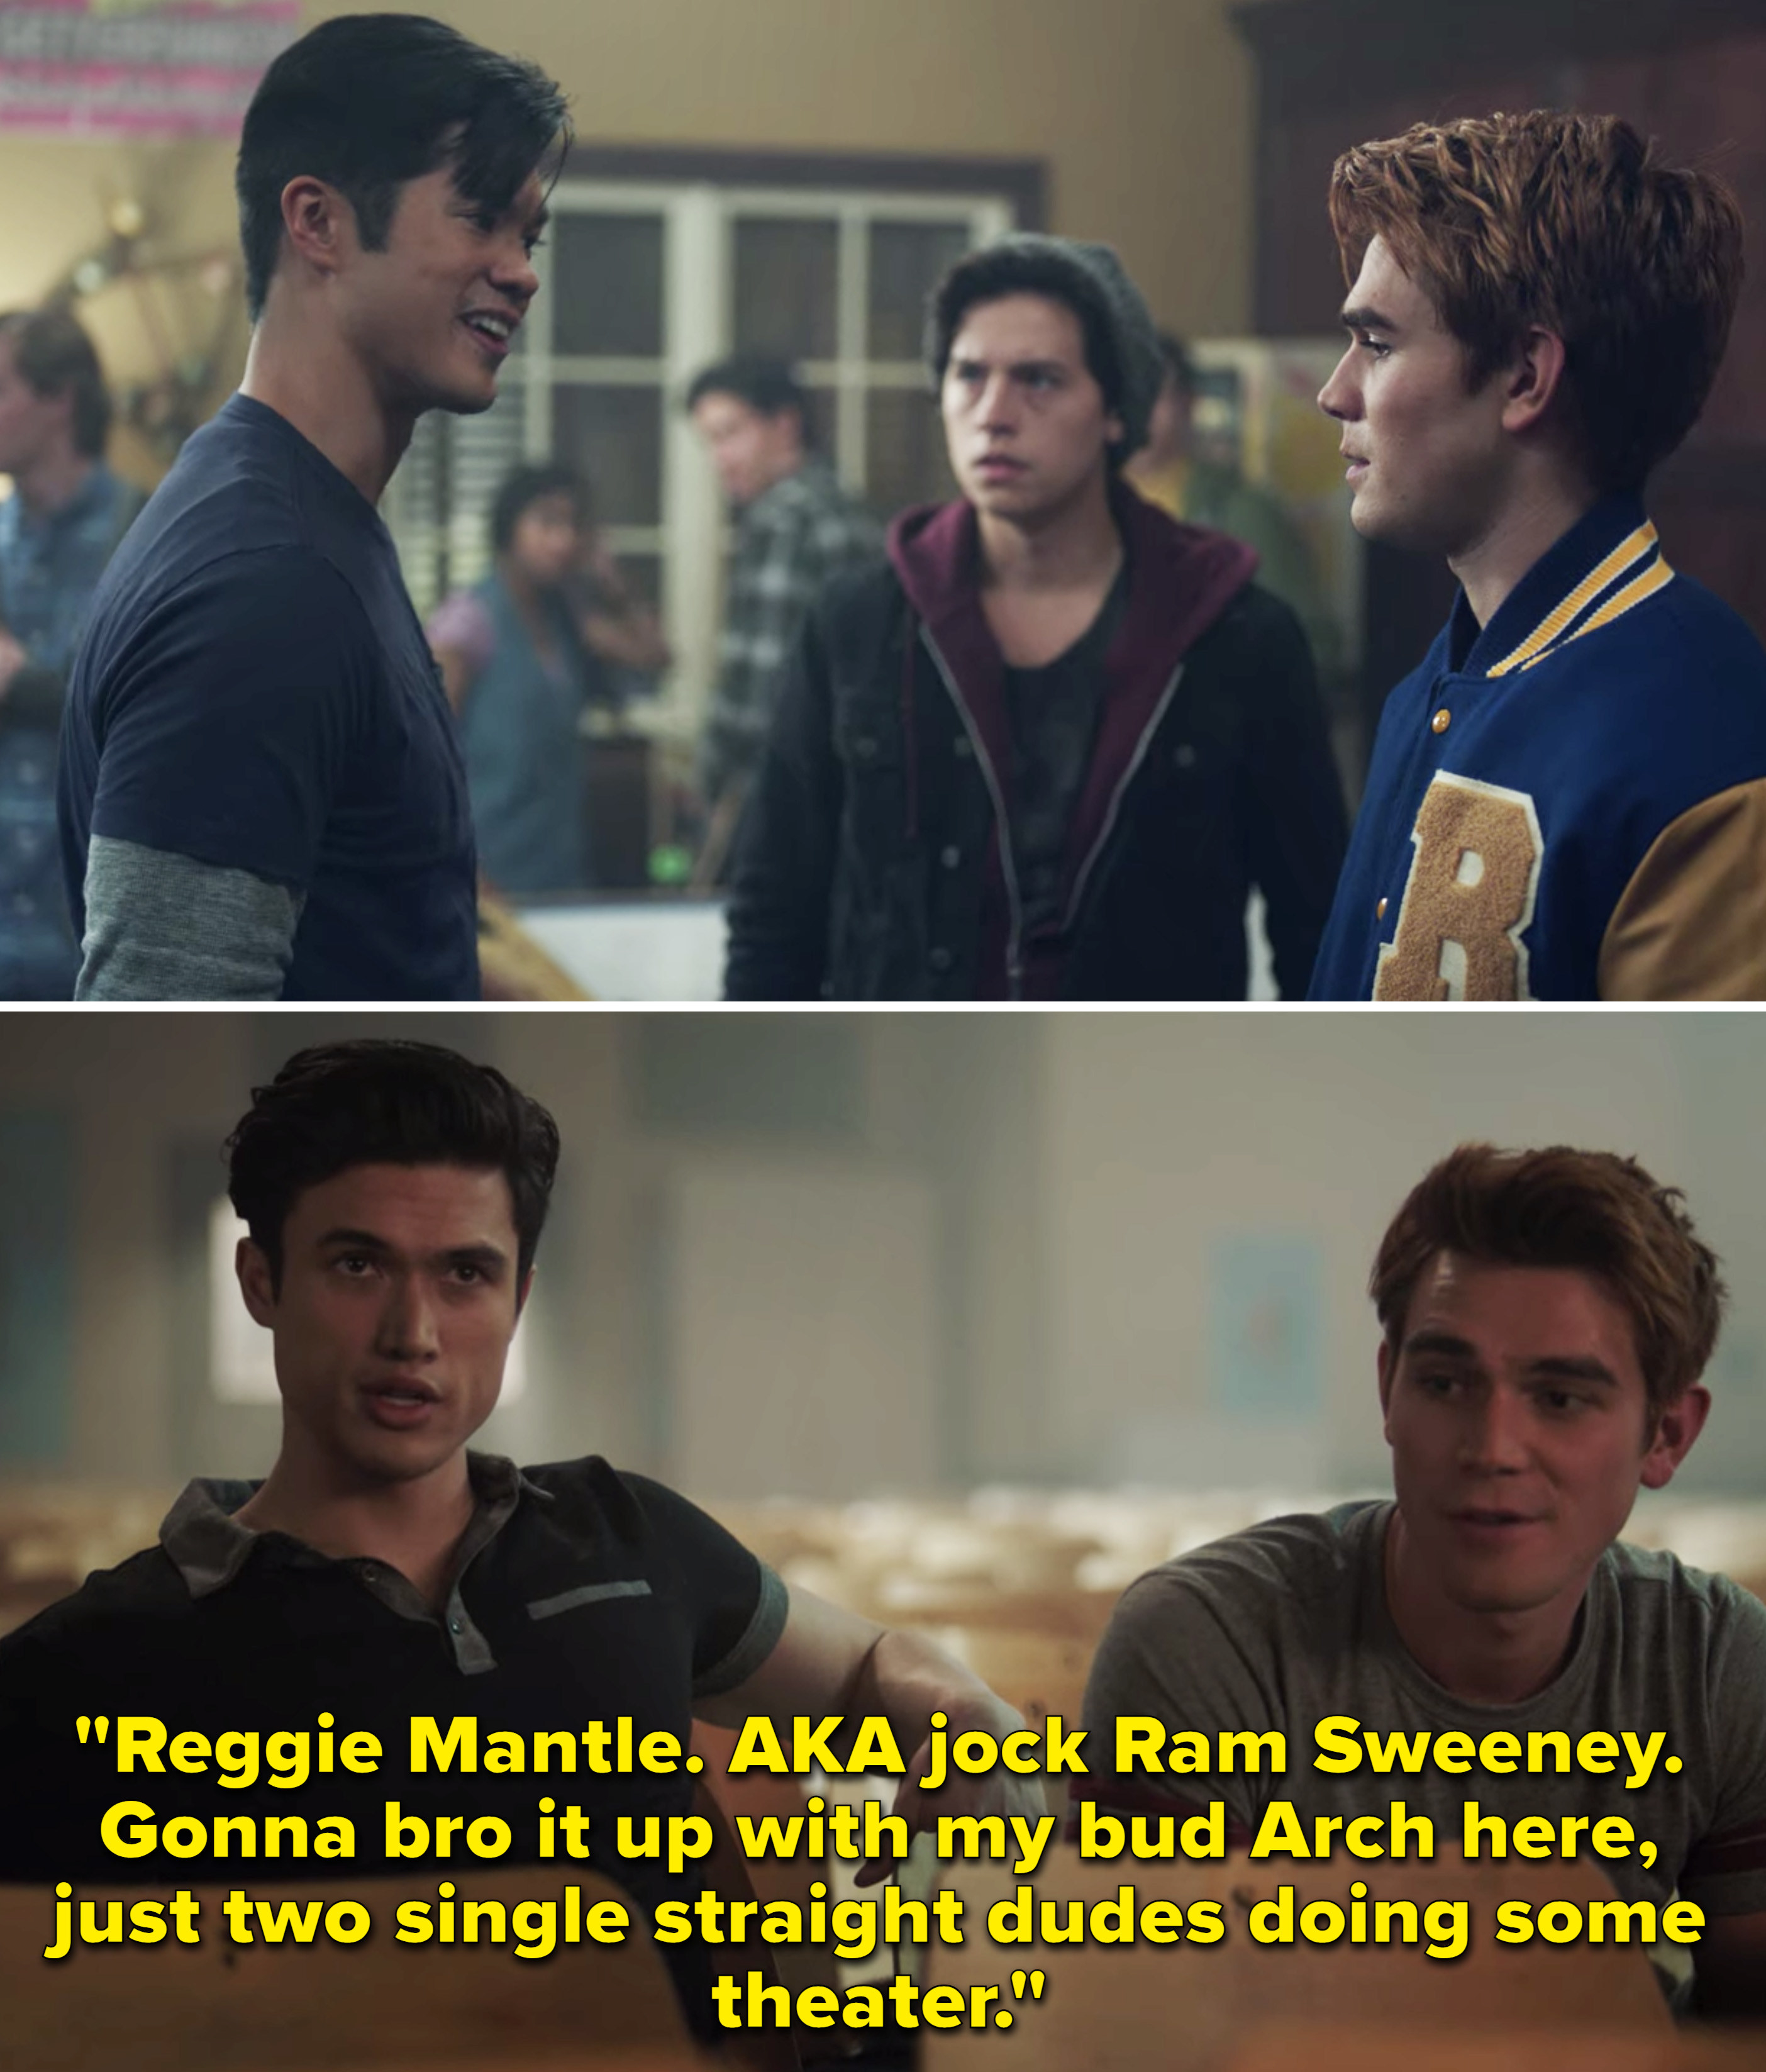 Reggie saying, &quot;Reggie Mantle. AKA jock Ram Sweeney. Gonna bro it up with my bud Arch here, just two single straight dudes doing some theater&quot;